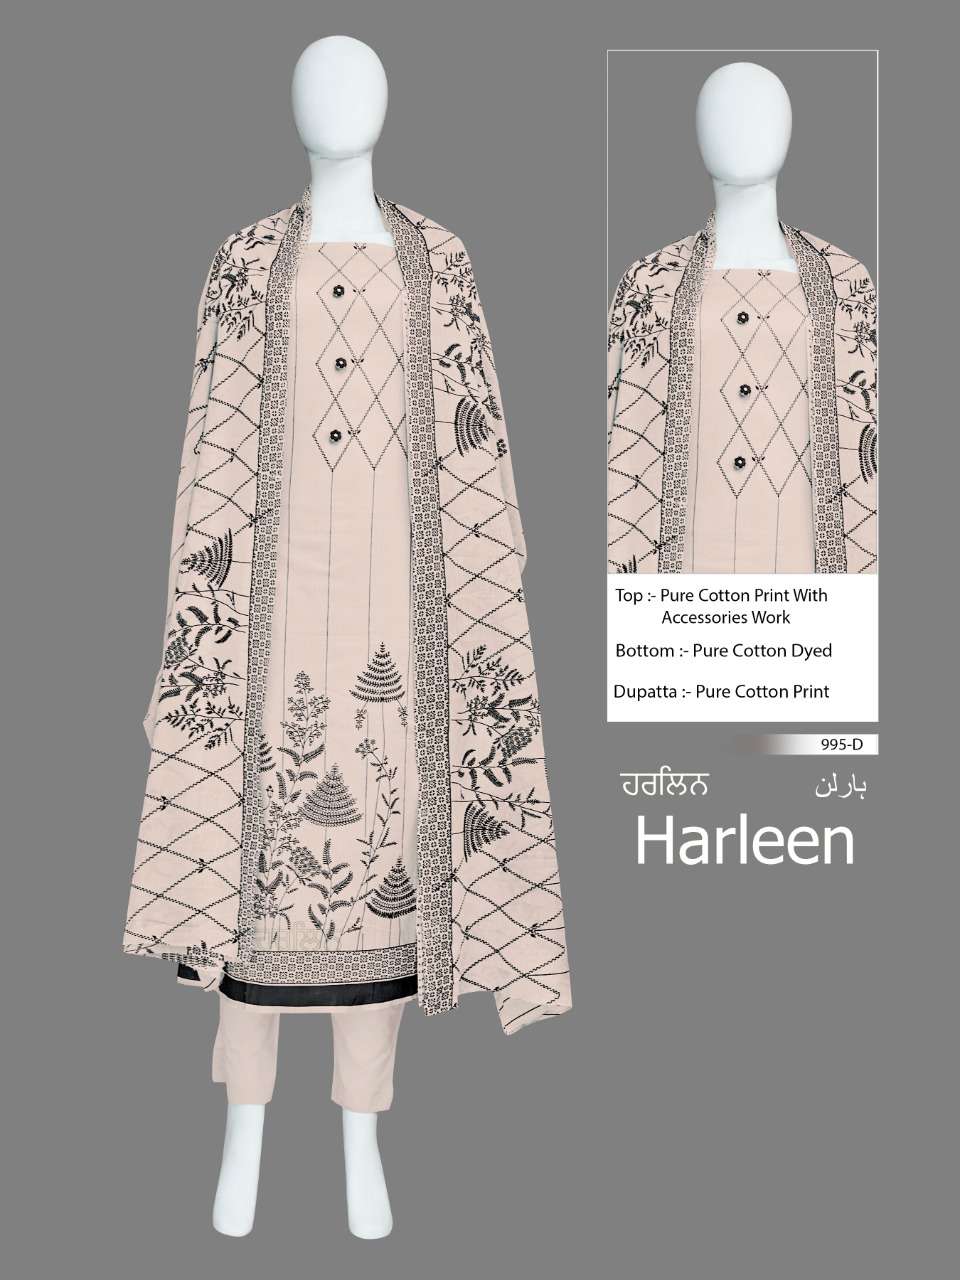 BIPSON PRINTS HARLEEN 995 PURE COTTON PRINT WITH ACCESSORIES WORK